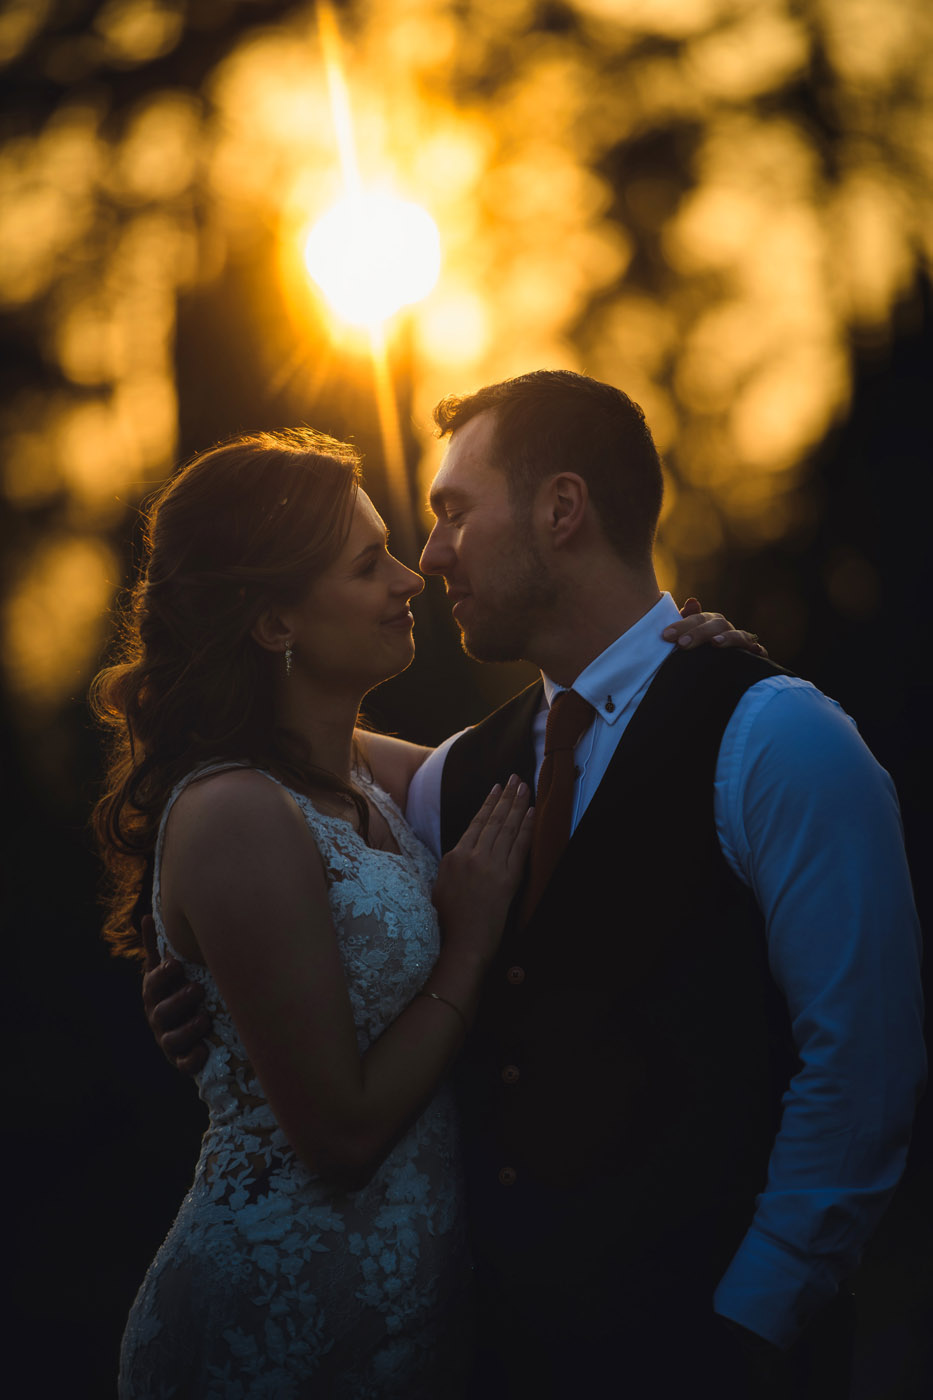 Bride & Groom sunset wedding photography at Tortworth Court